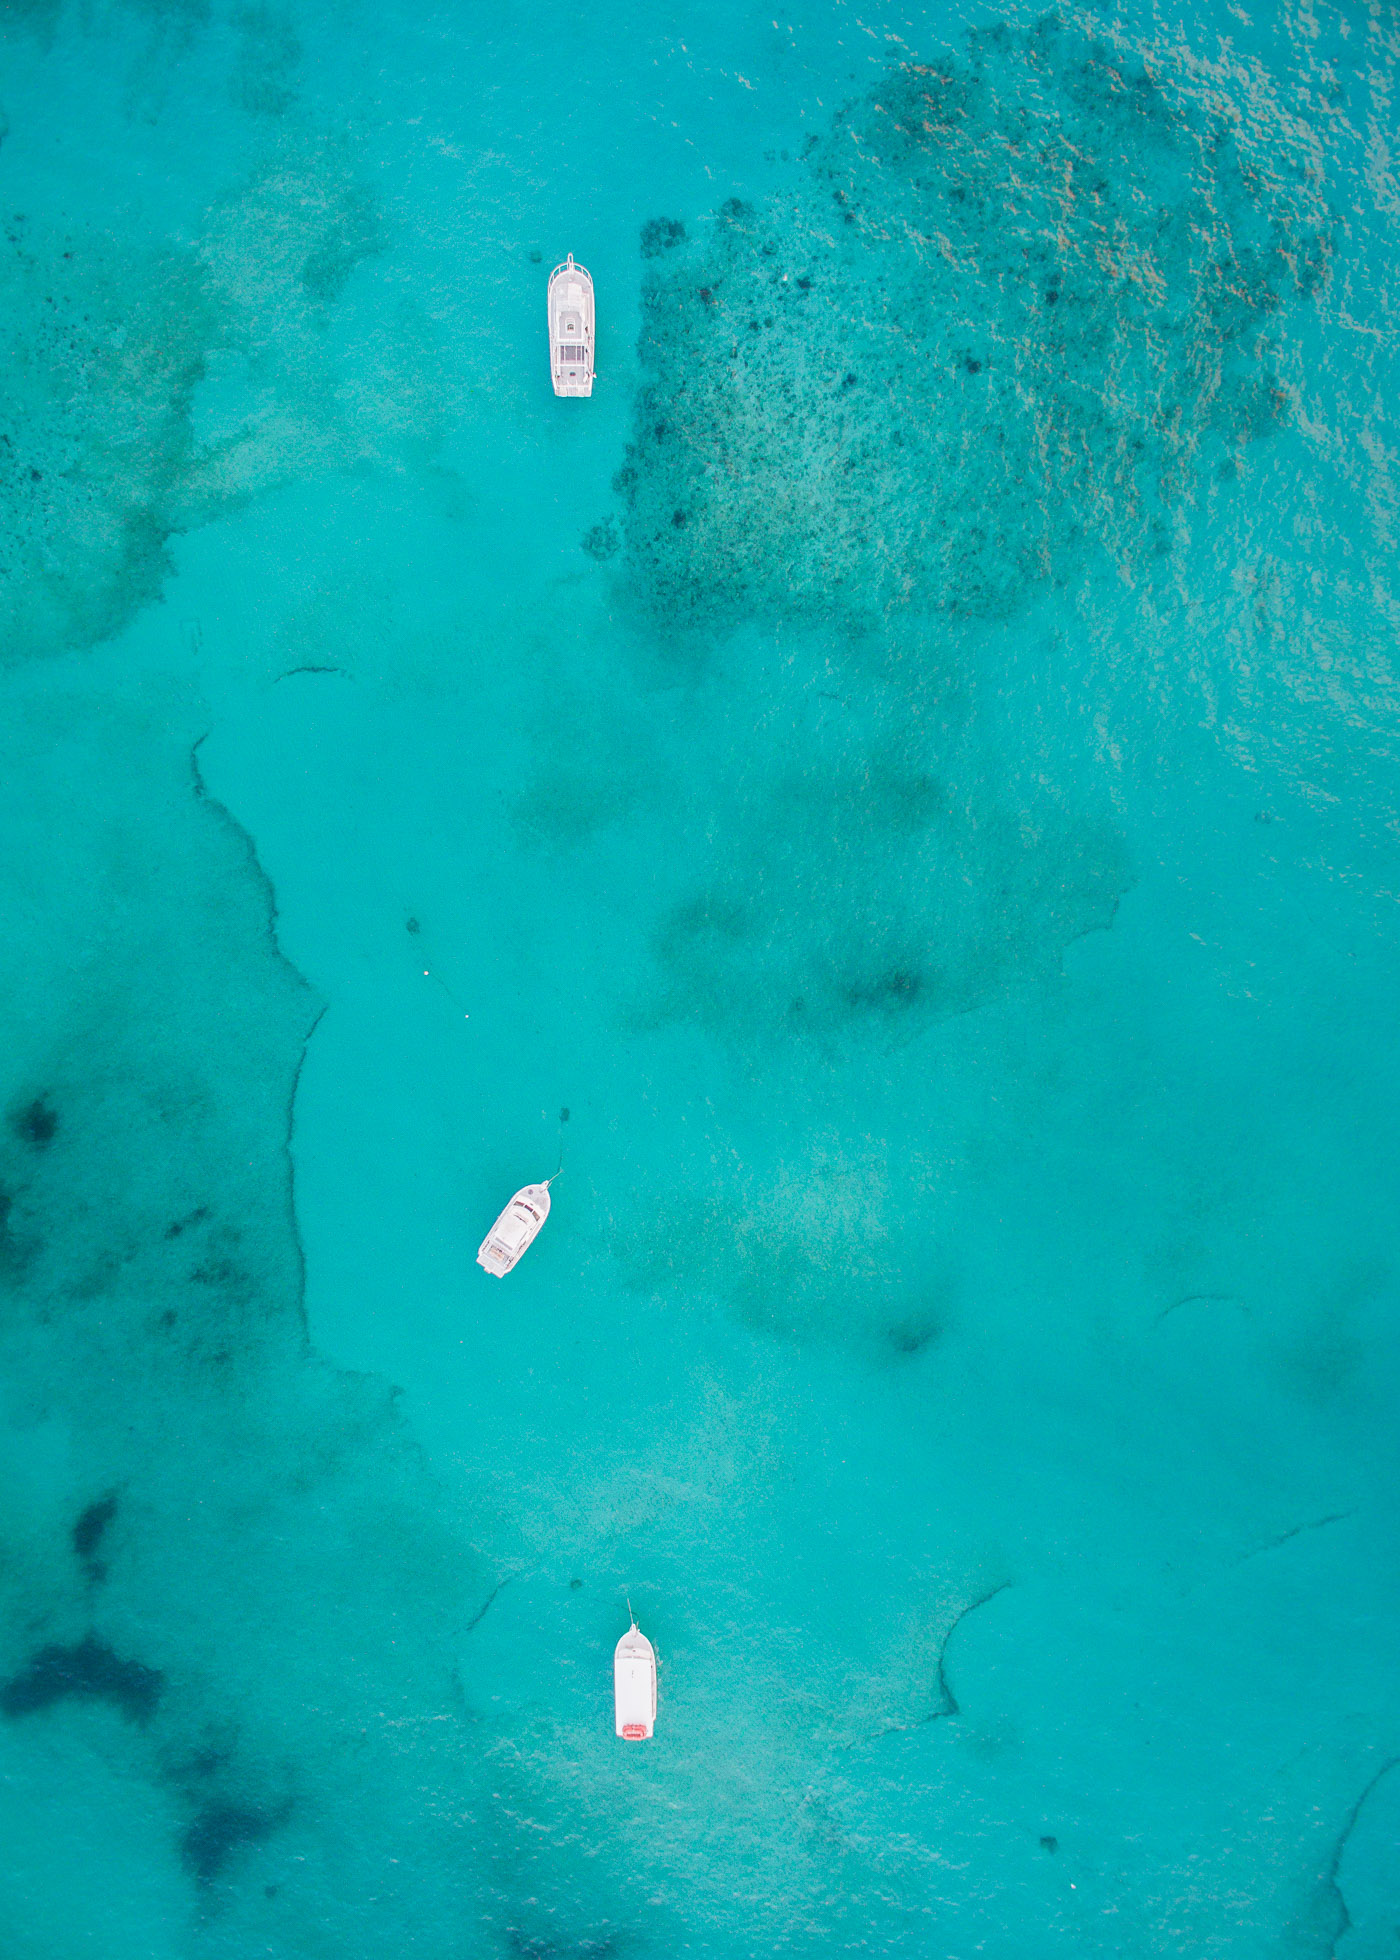 Boats in Turks and Caicos, as seen from a drone.